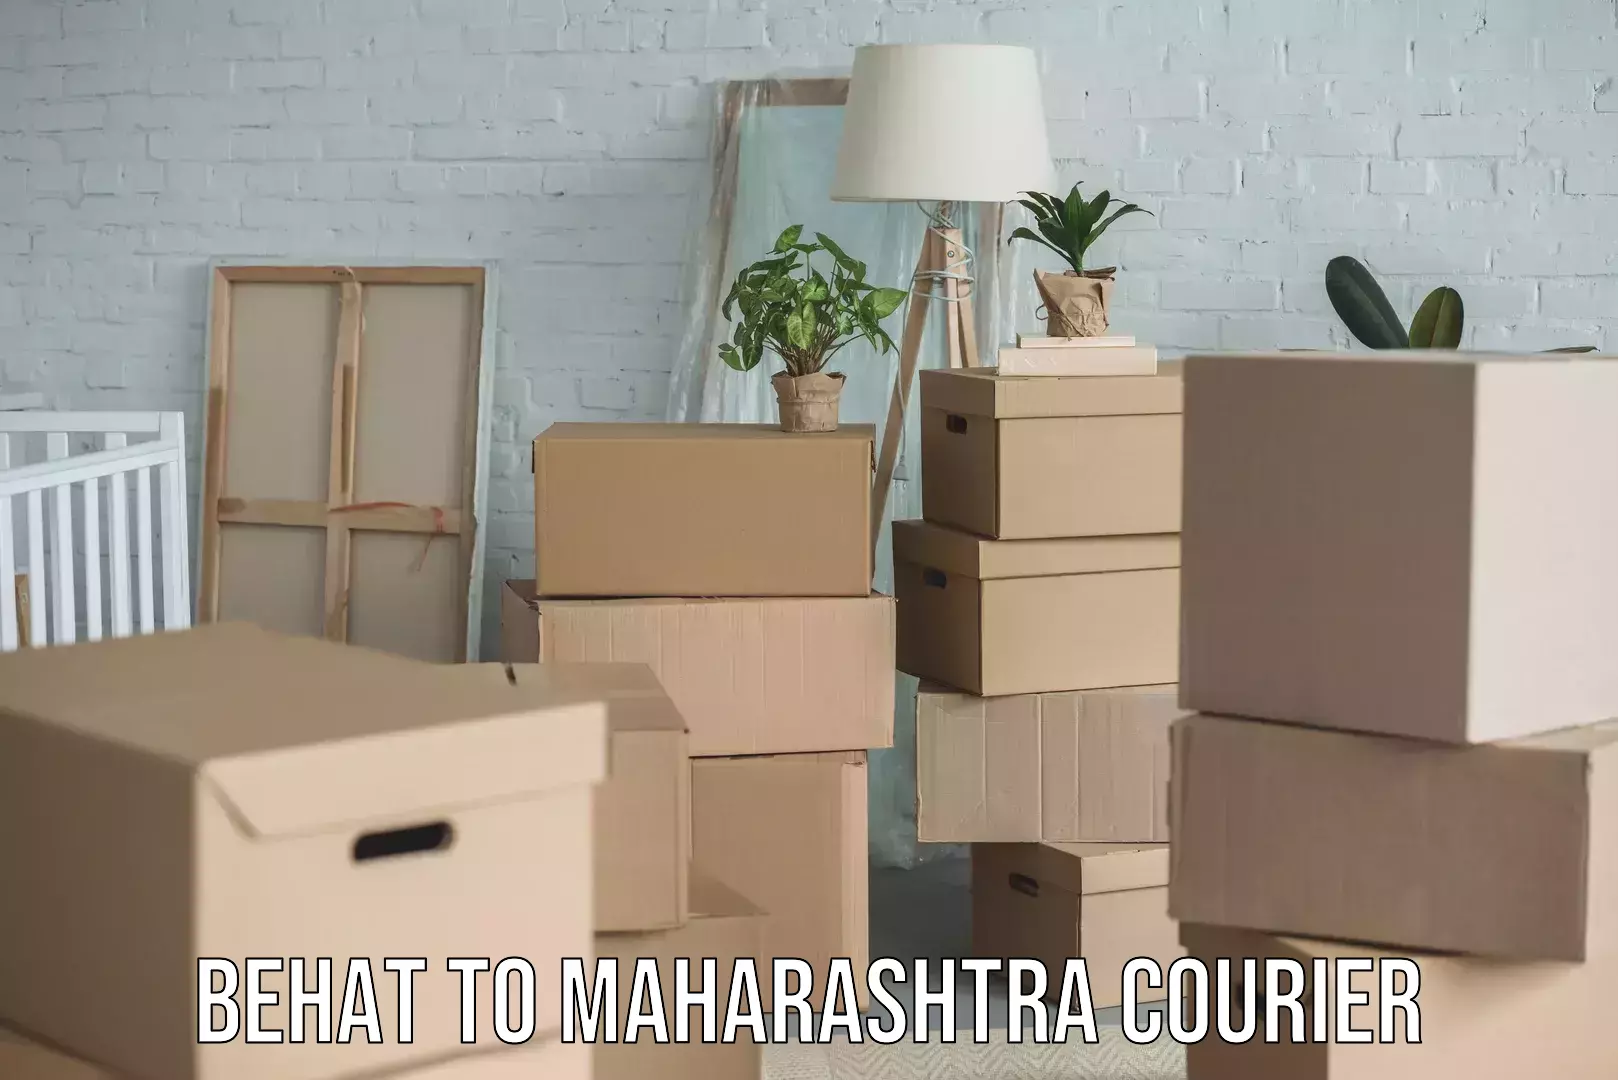 Supply chain delivery Behat to Maharashtra